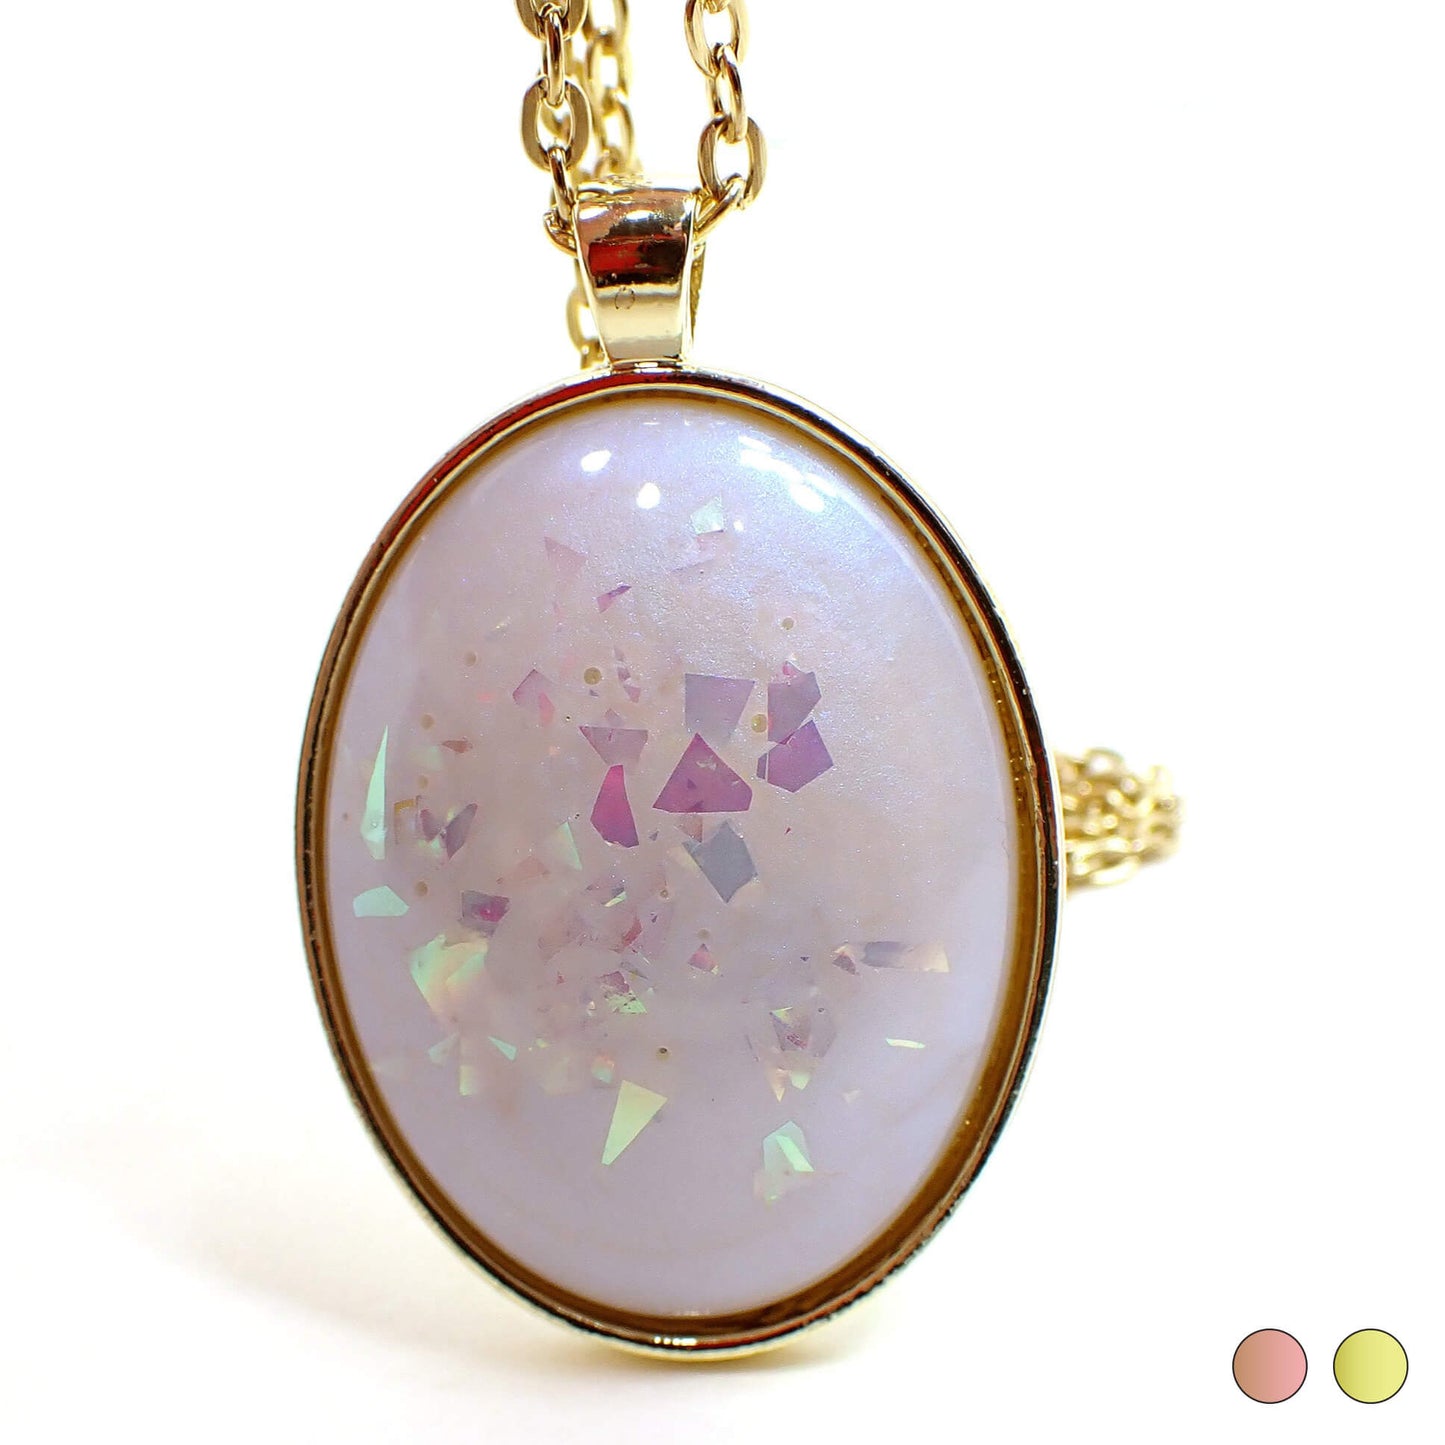 Front view of the large handmade oval resin pendant necklace. The resin has an opal like color shift sheen of blue. There is AB pink chunky glitter embedded in the resin. The setting shown is gold plated color but there are two dots at the bottom right of the photo showing a choice of rose gold plated or gold plated.